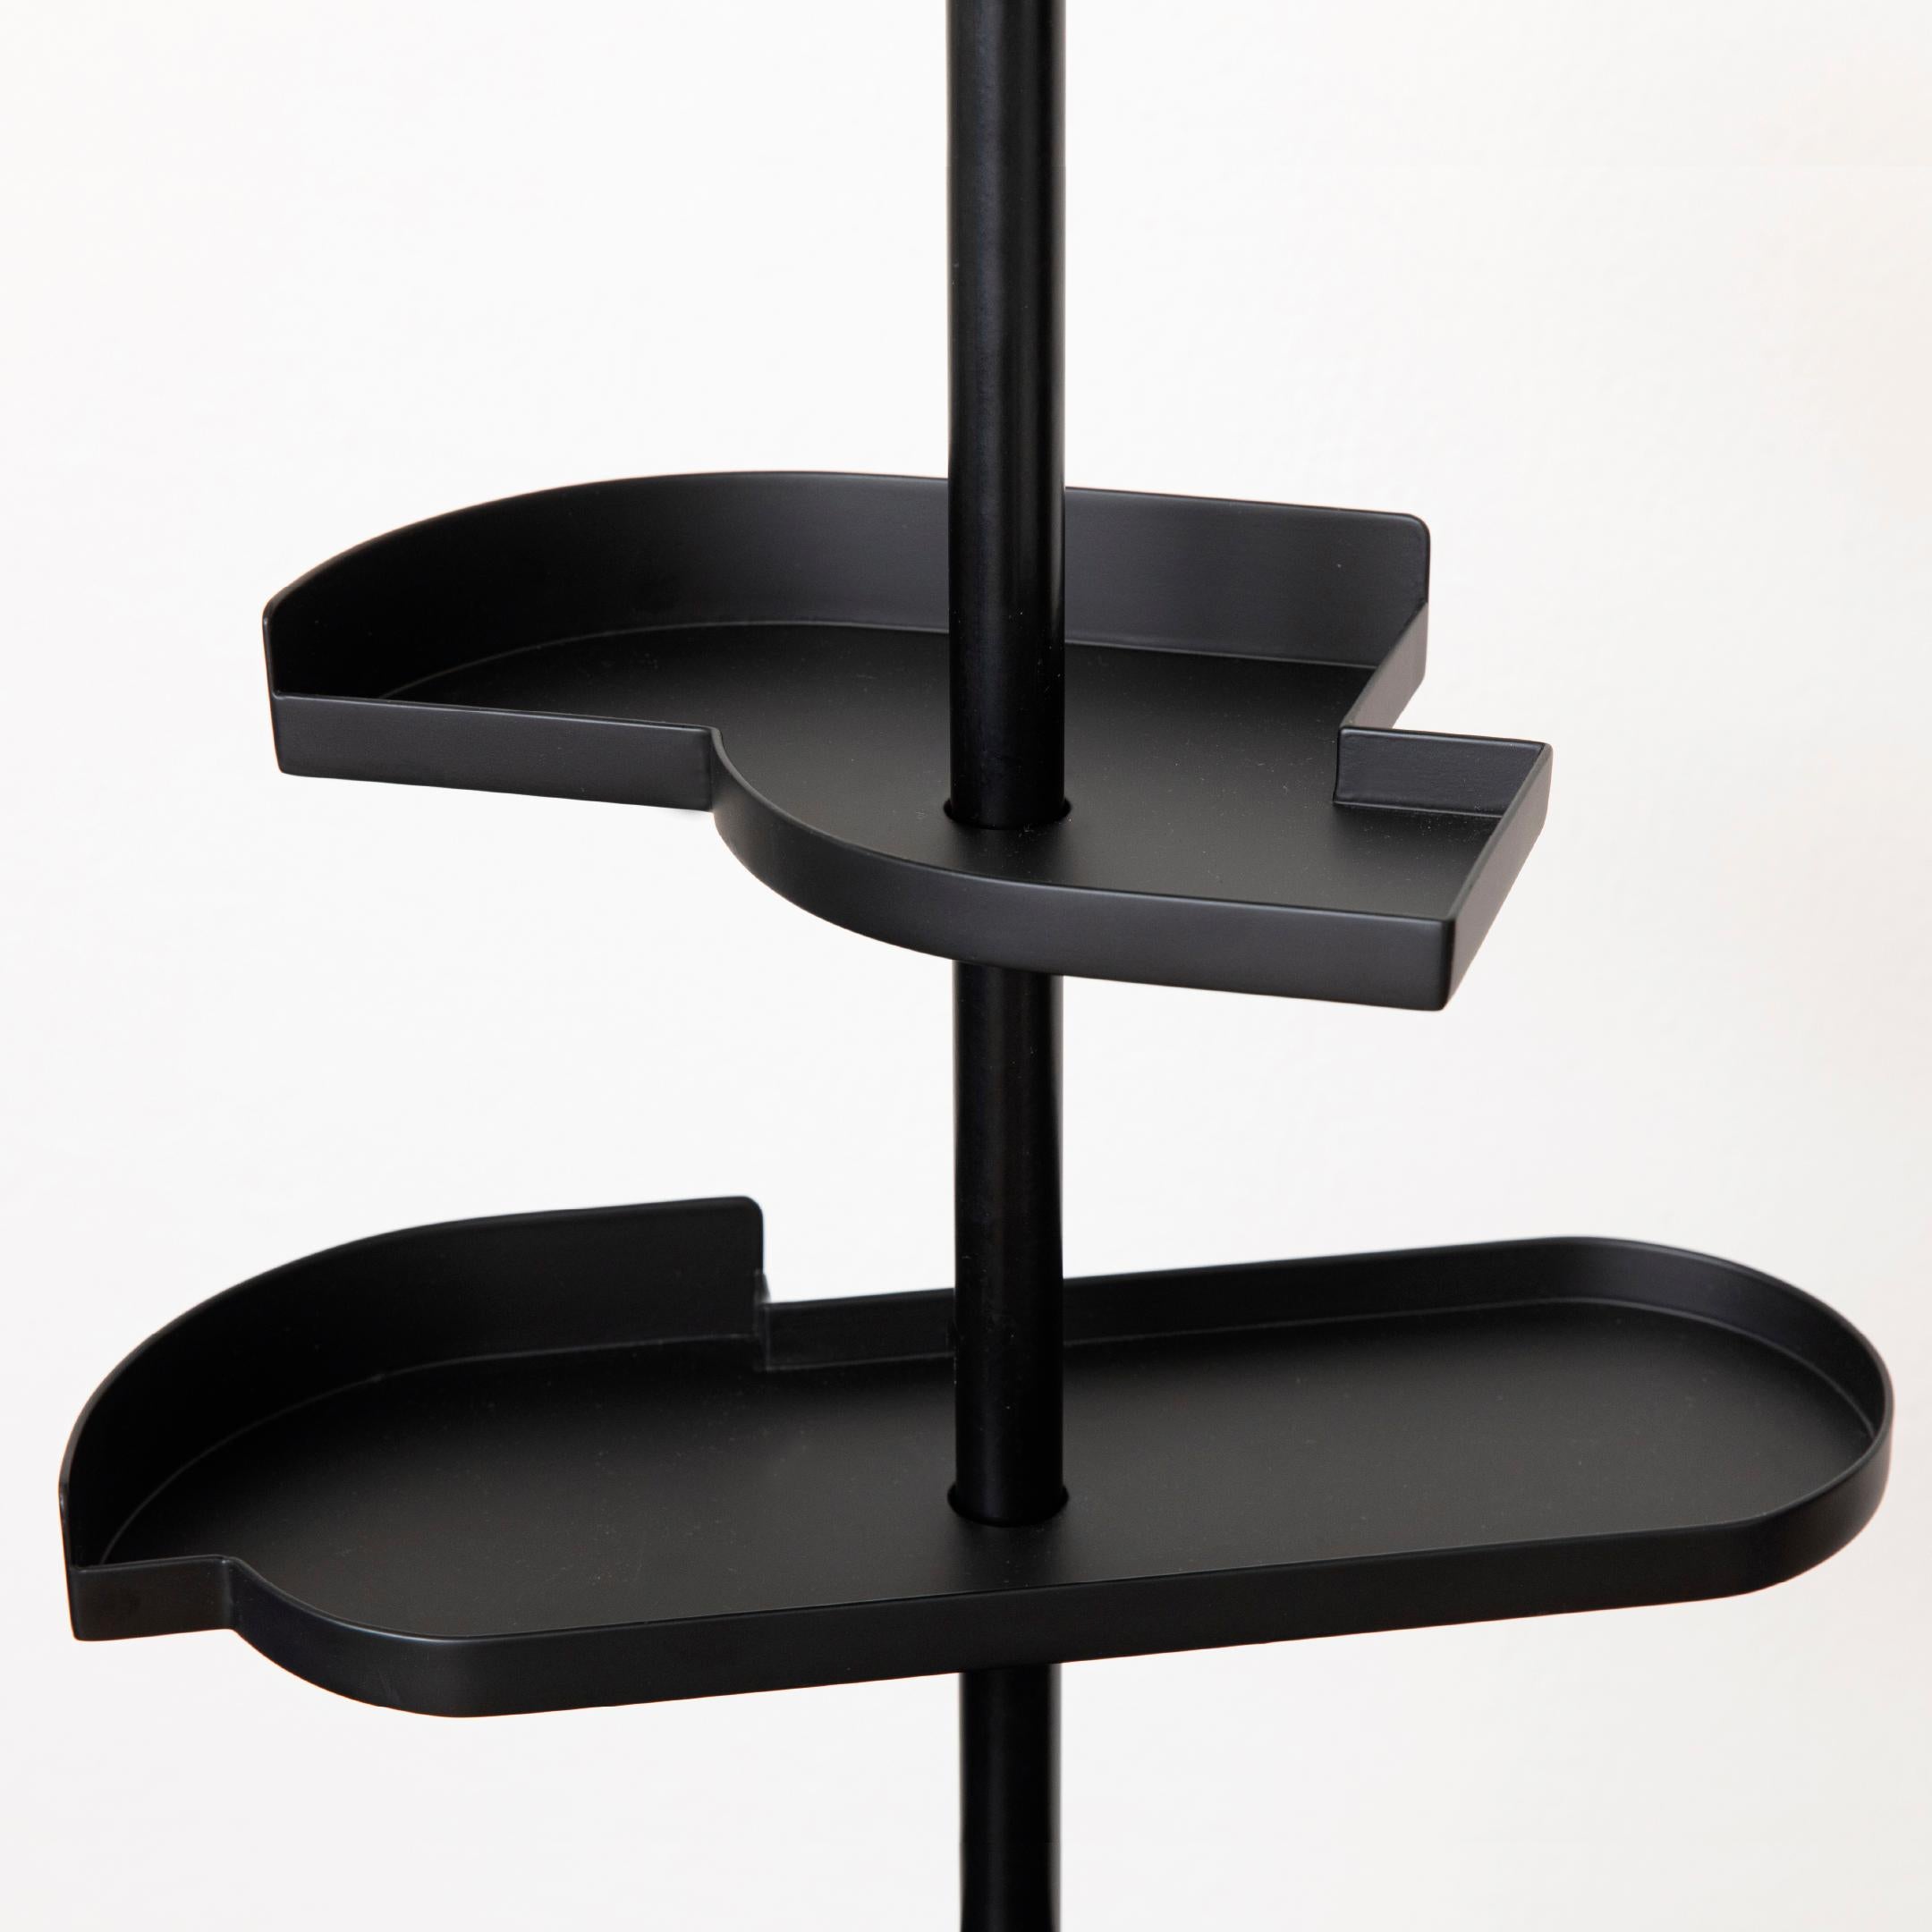 Hand-Crafted Alea Contemporary Minimal Telescopic Shelf Display Black Metal Limited Edition For Sale